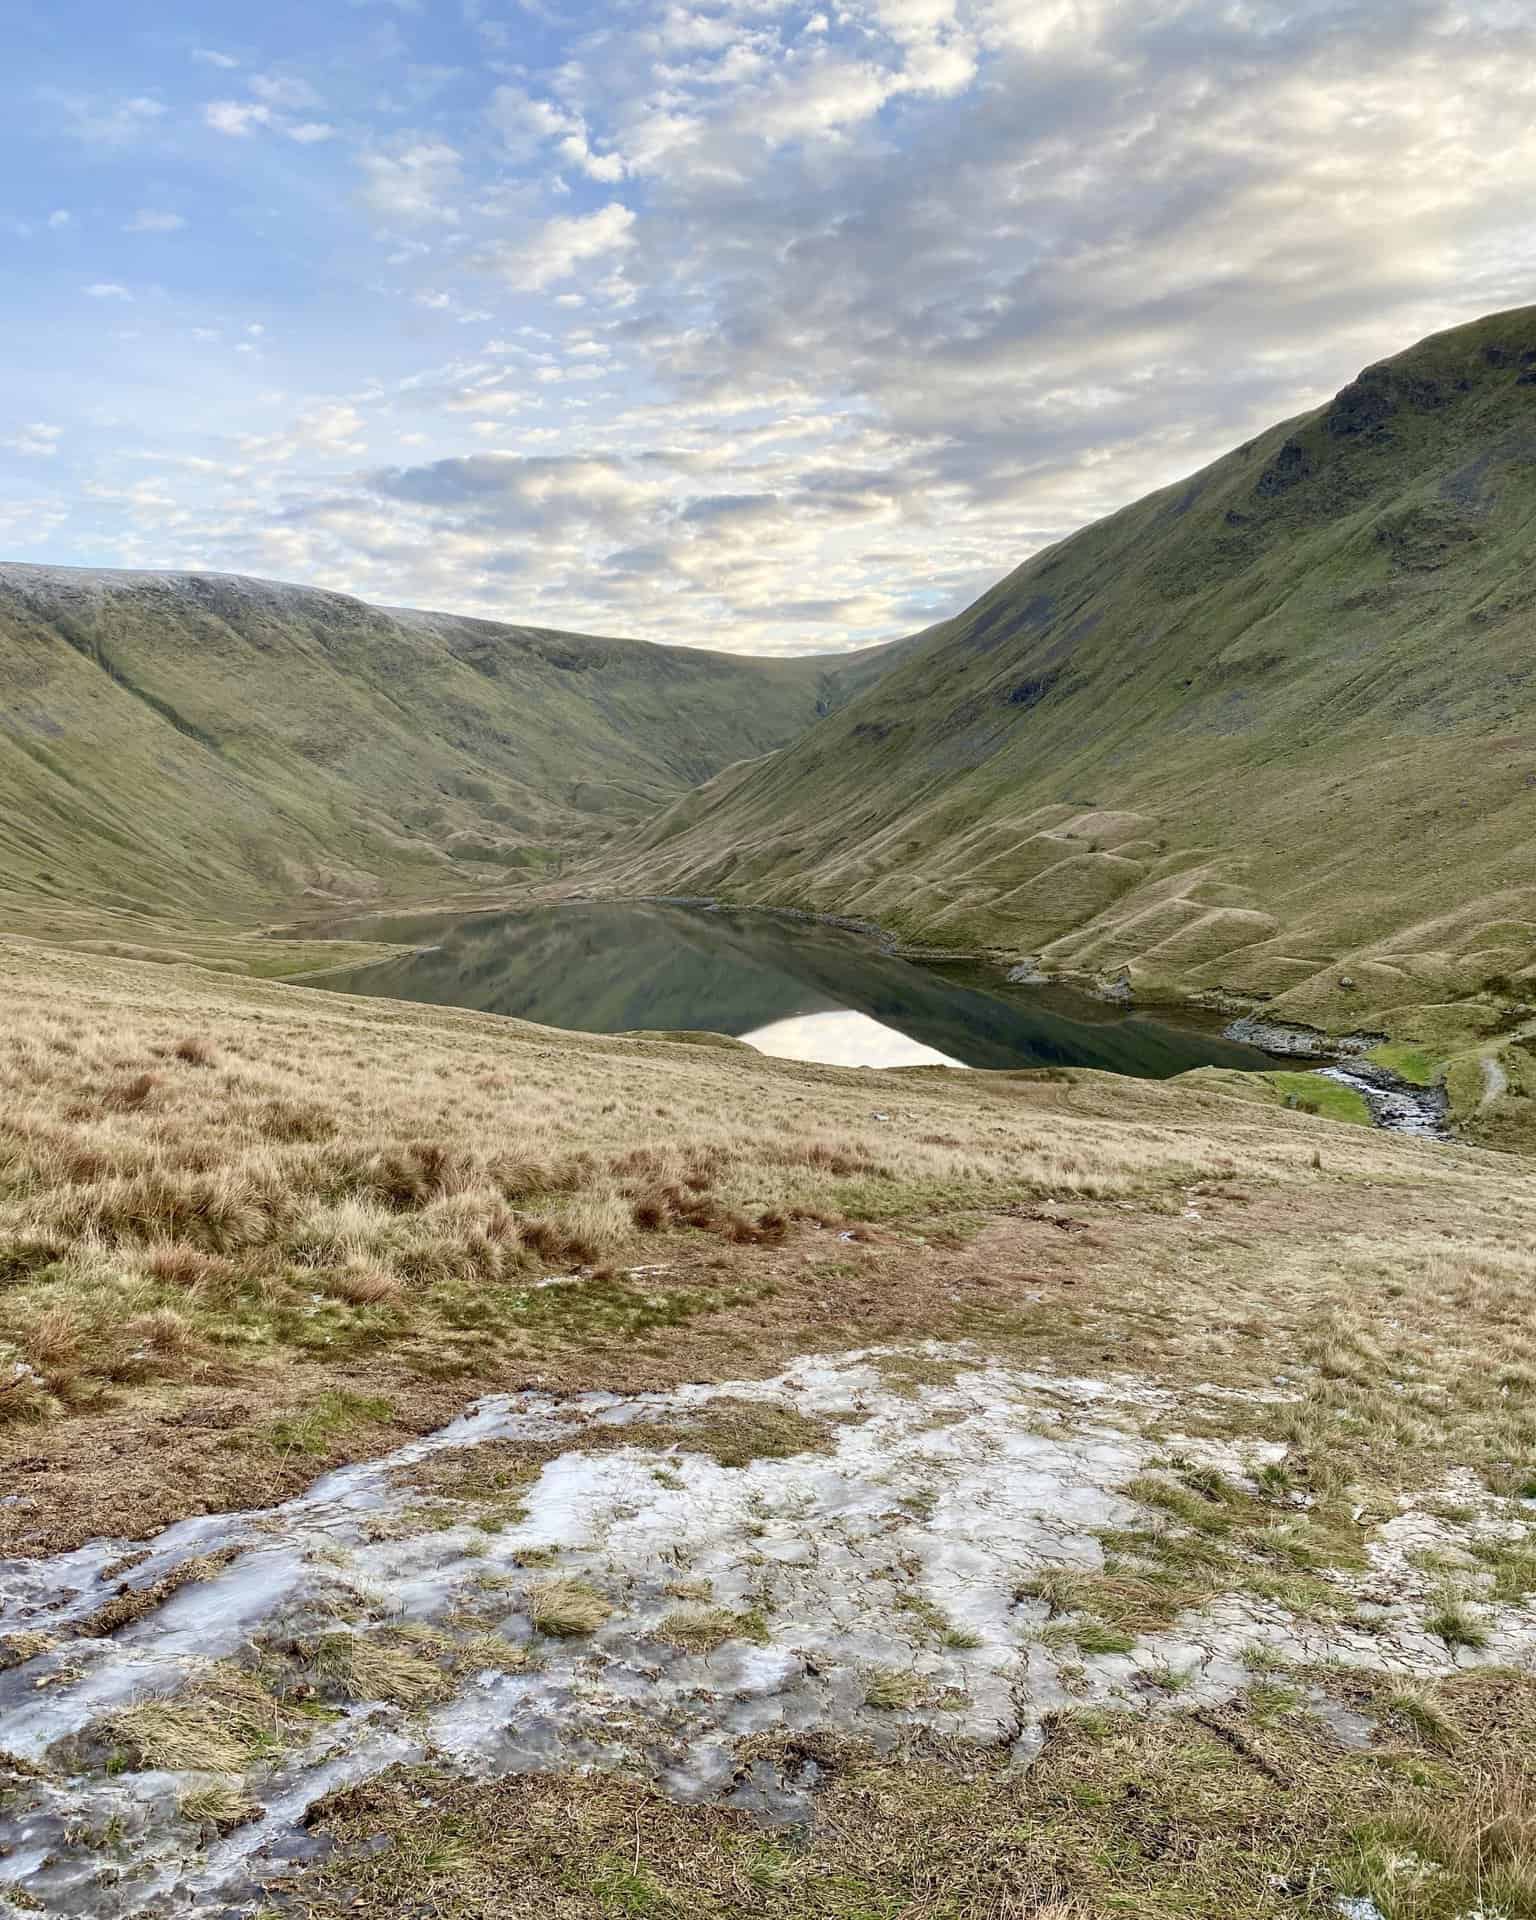 Hayeswater nestled in the valley at the foot of Gray Crag (right).